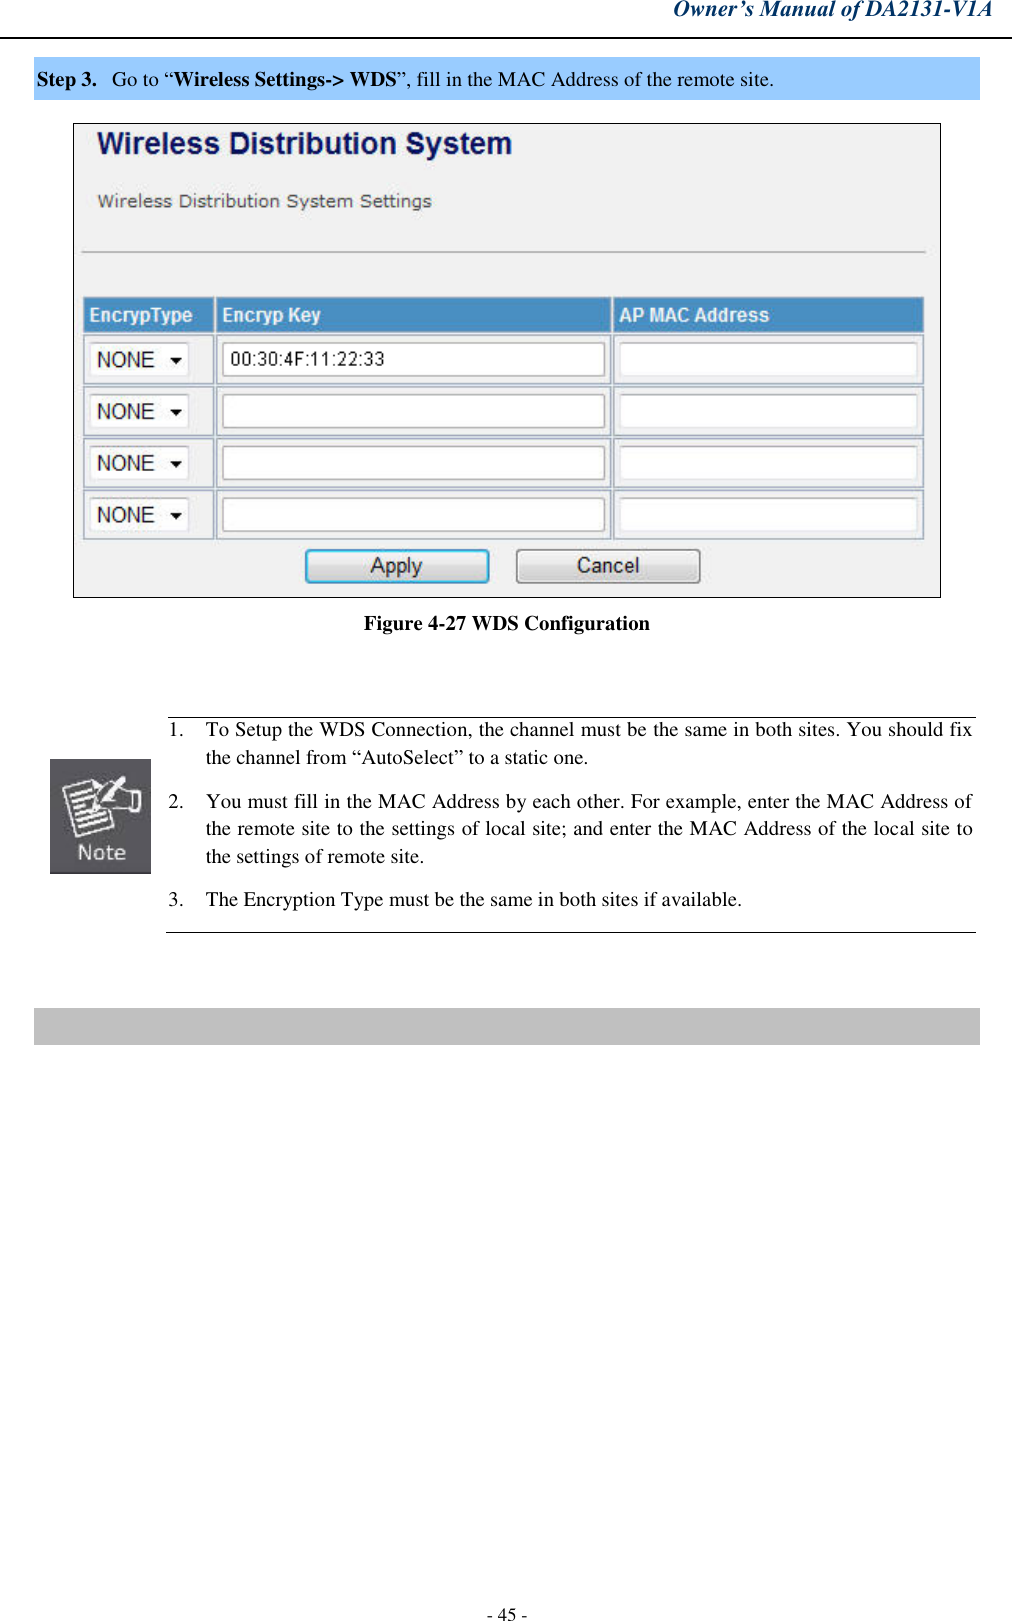 Owner’s Manual of DA2131-V1A - 45 - Step 3. Go to “Wireless Settings-&gt; WDS”, fill in the MAC Address of the remote site. Figure 4-27 WDS Configuration 1. To Setup the WDS Connection, the channel must be the same in both sites. You should fix the channel from “AutoSelect” to a static one.2. You must fill in the MAC Address by each other. For example, enter the MAC Address ofthe remote site to the settings of local site; and enter the MAC Address of the local site to the settings of remote site.3. The Encryption Type must be the same in both sites if available.